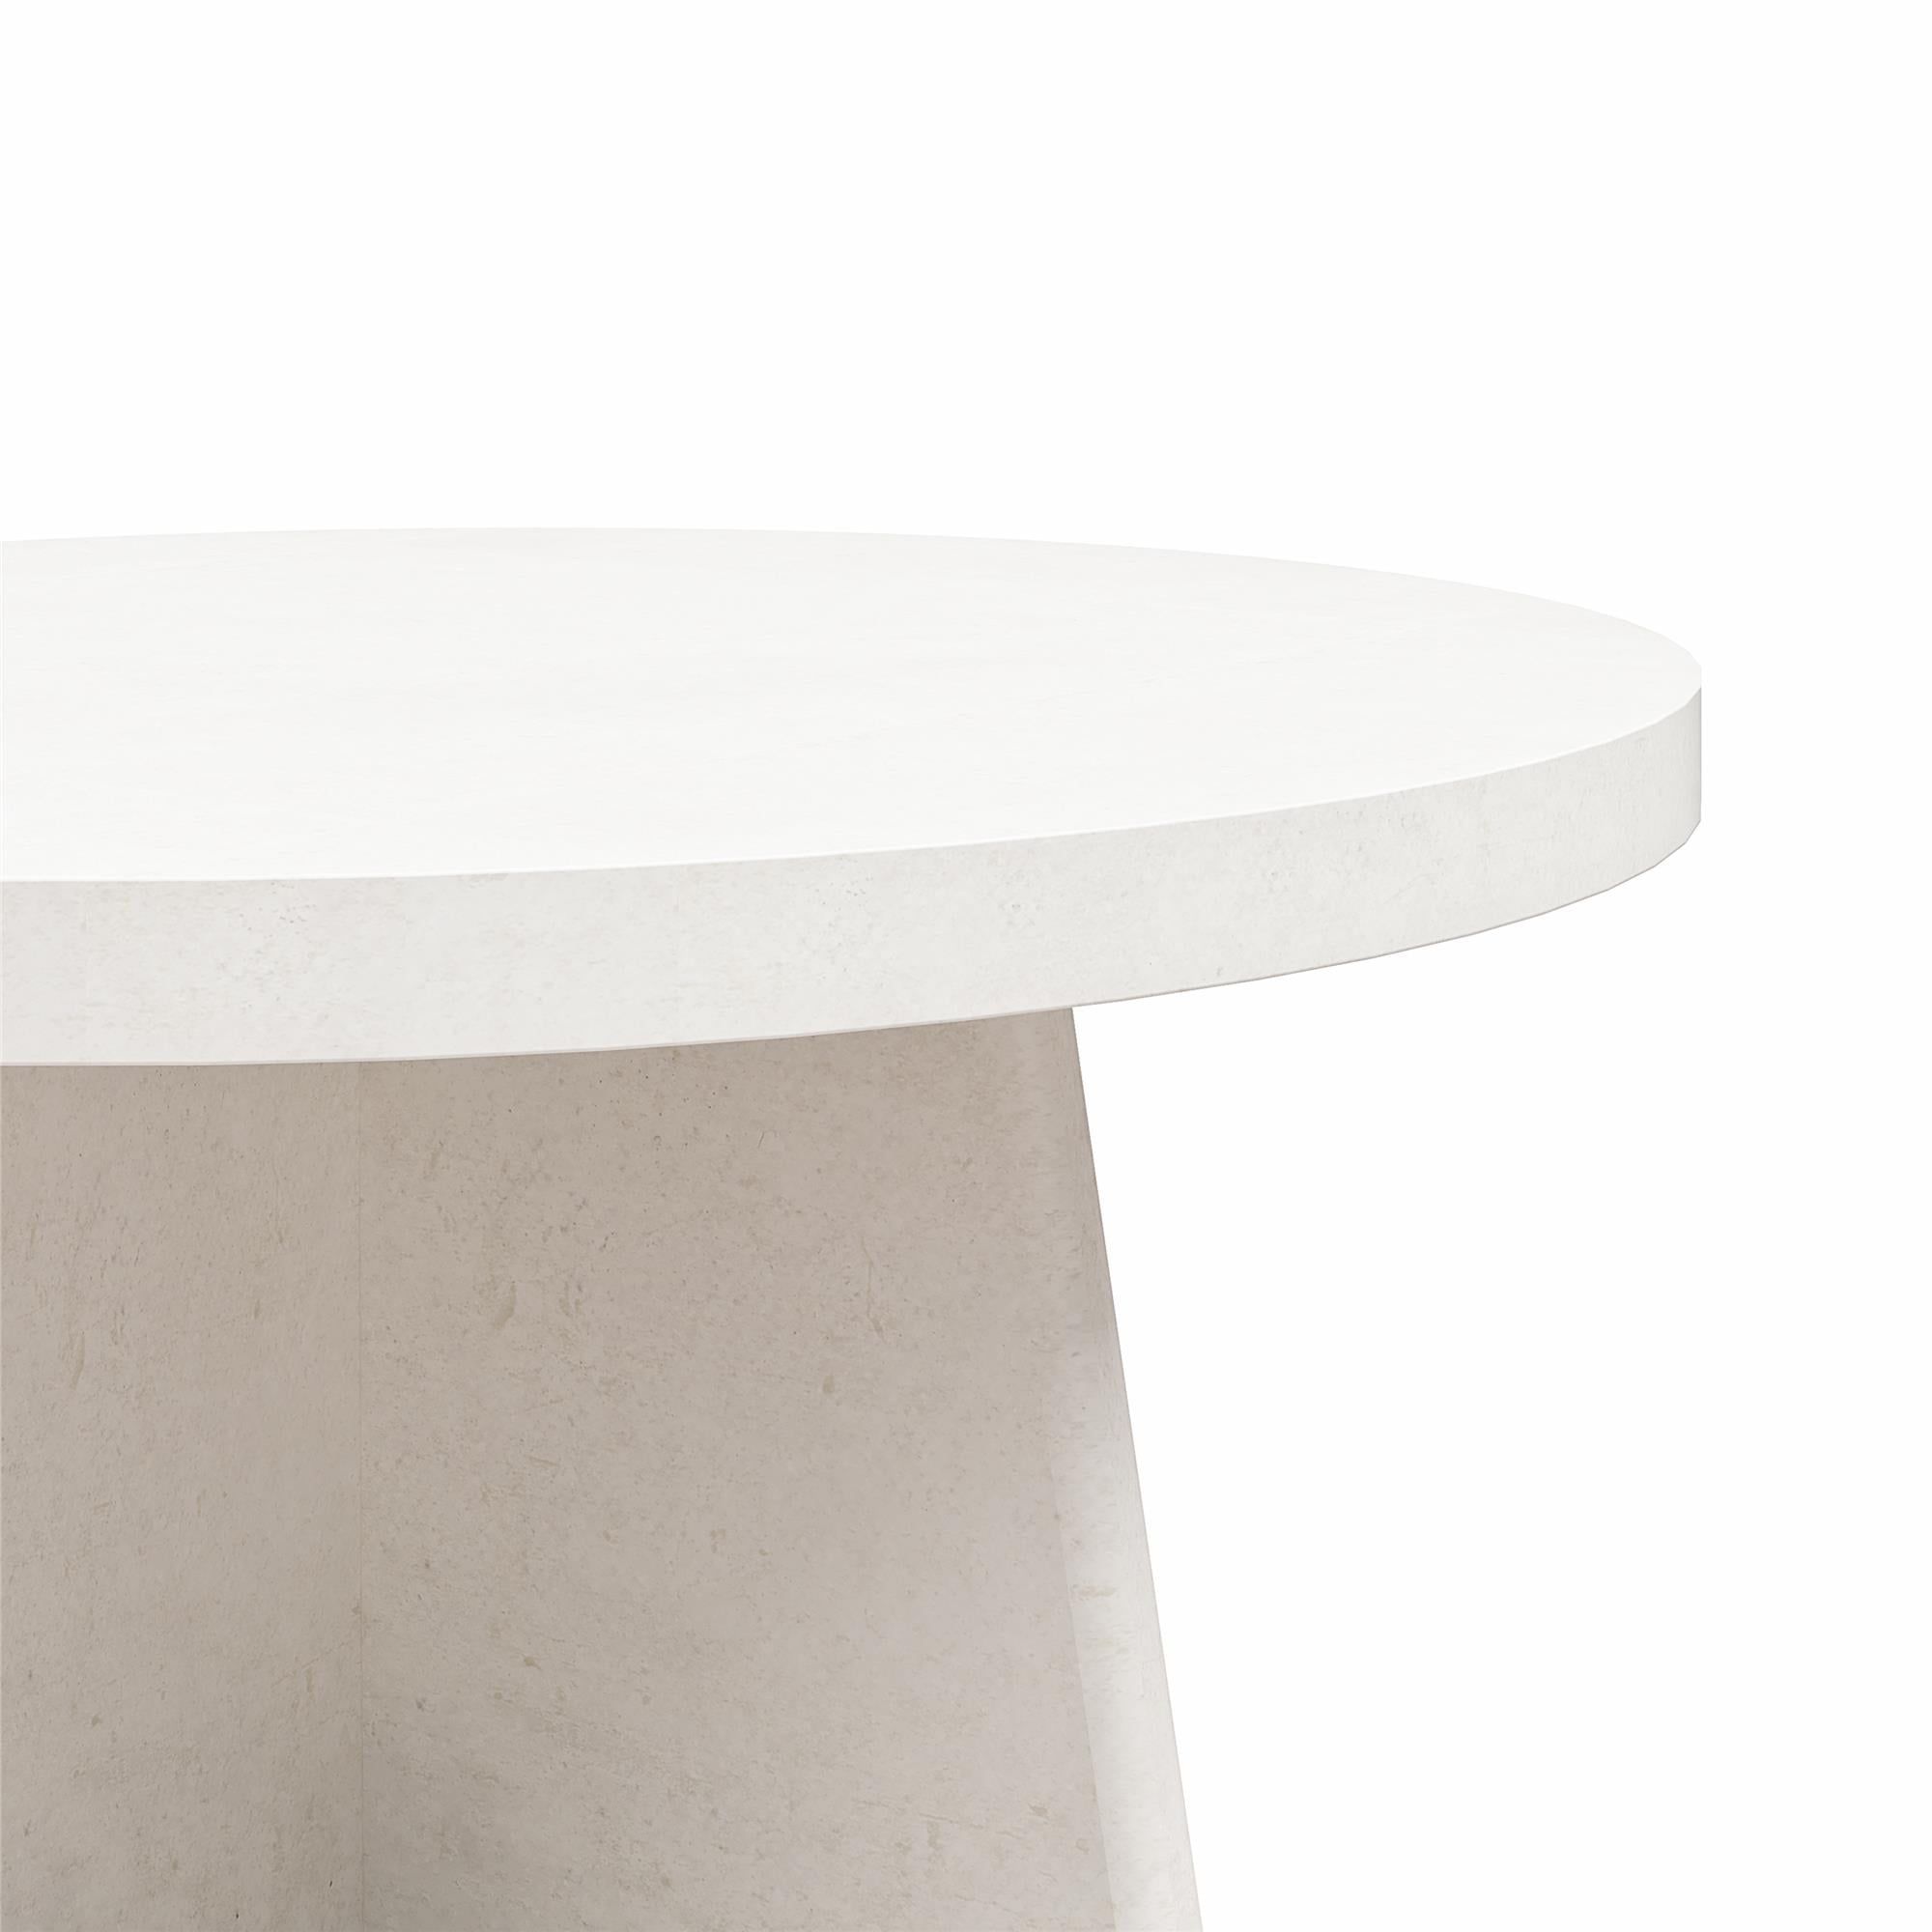 Queer Eye Liam Round Coffee Table, Plaster – Walmart Pertaining To Liam Round Plaster Coffee Tables (View 6 of 20)